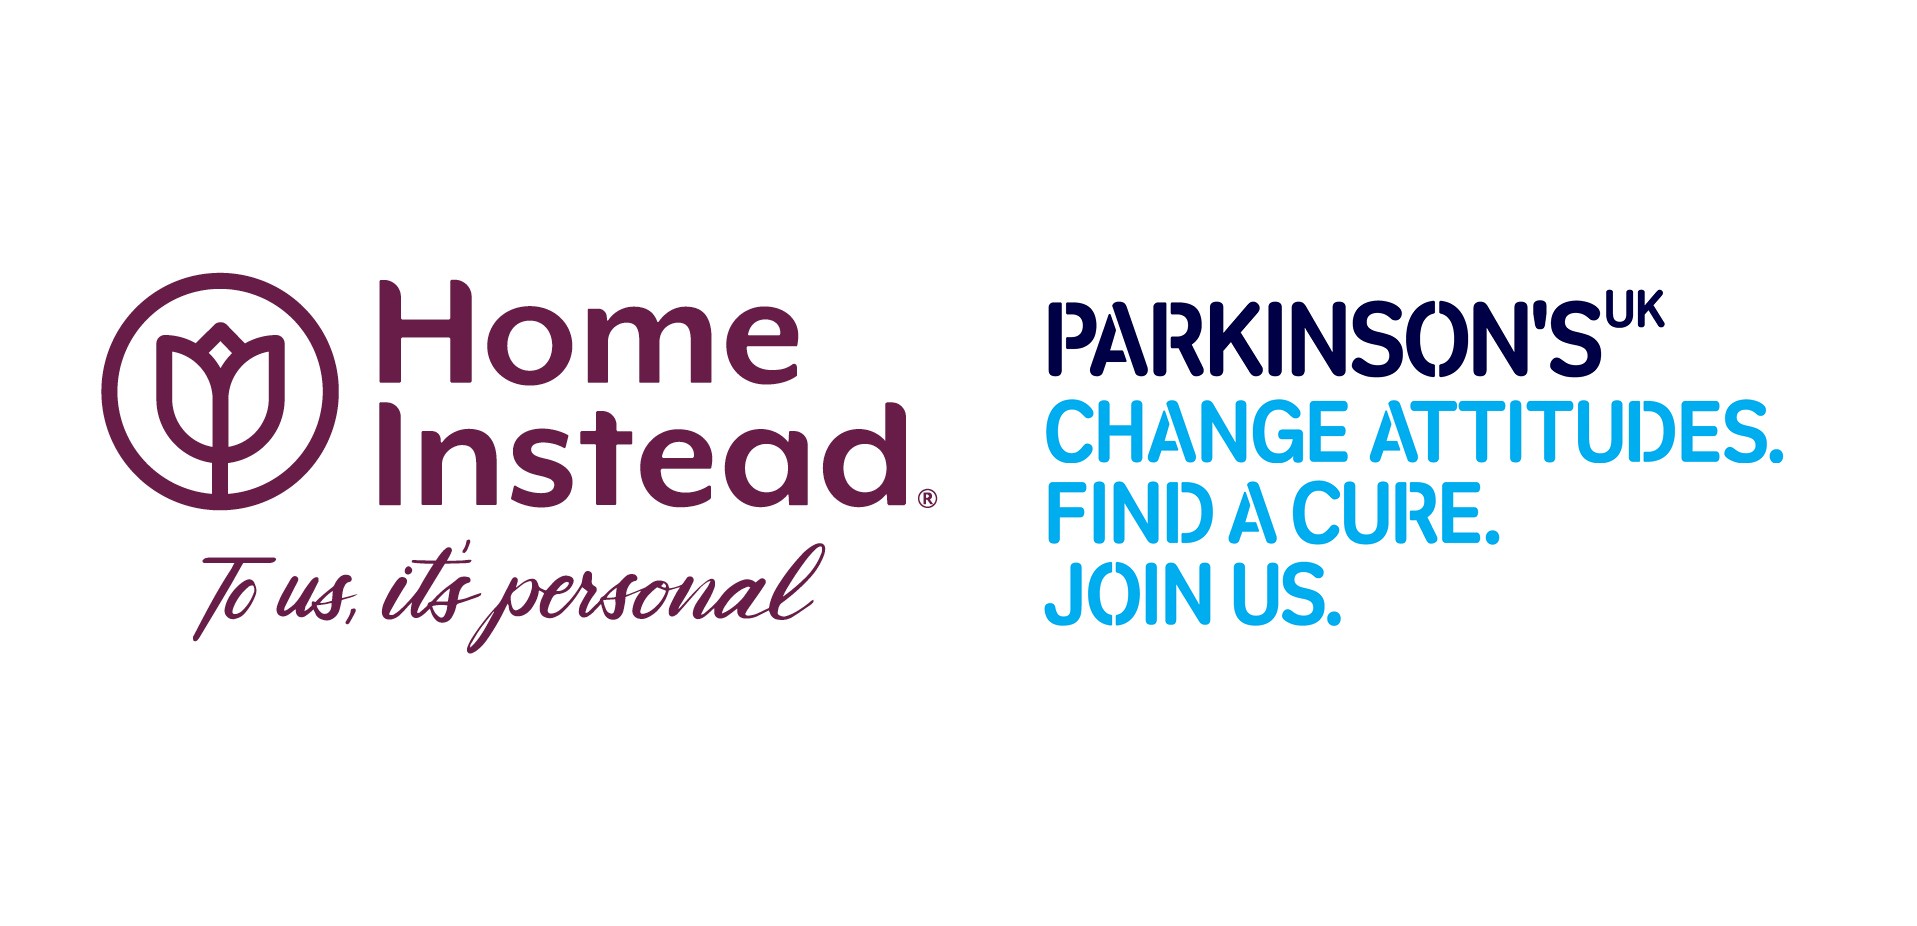 Home Instead launches partnership with Parkinson’s UK